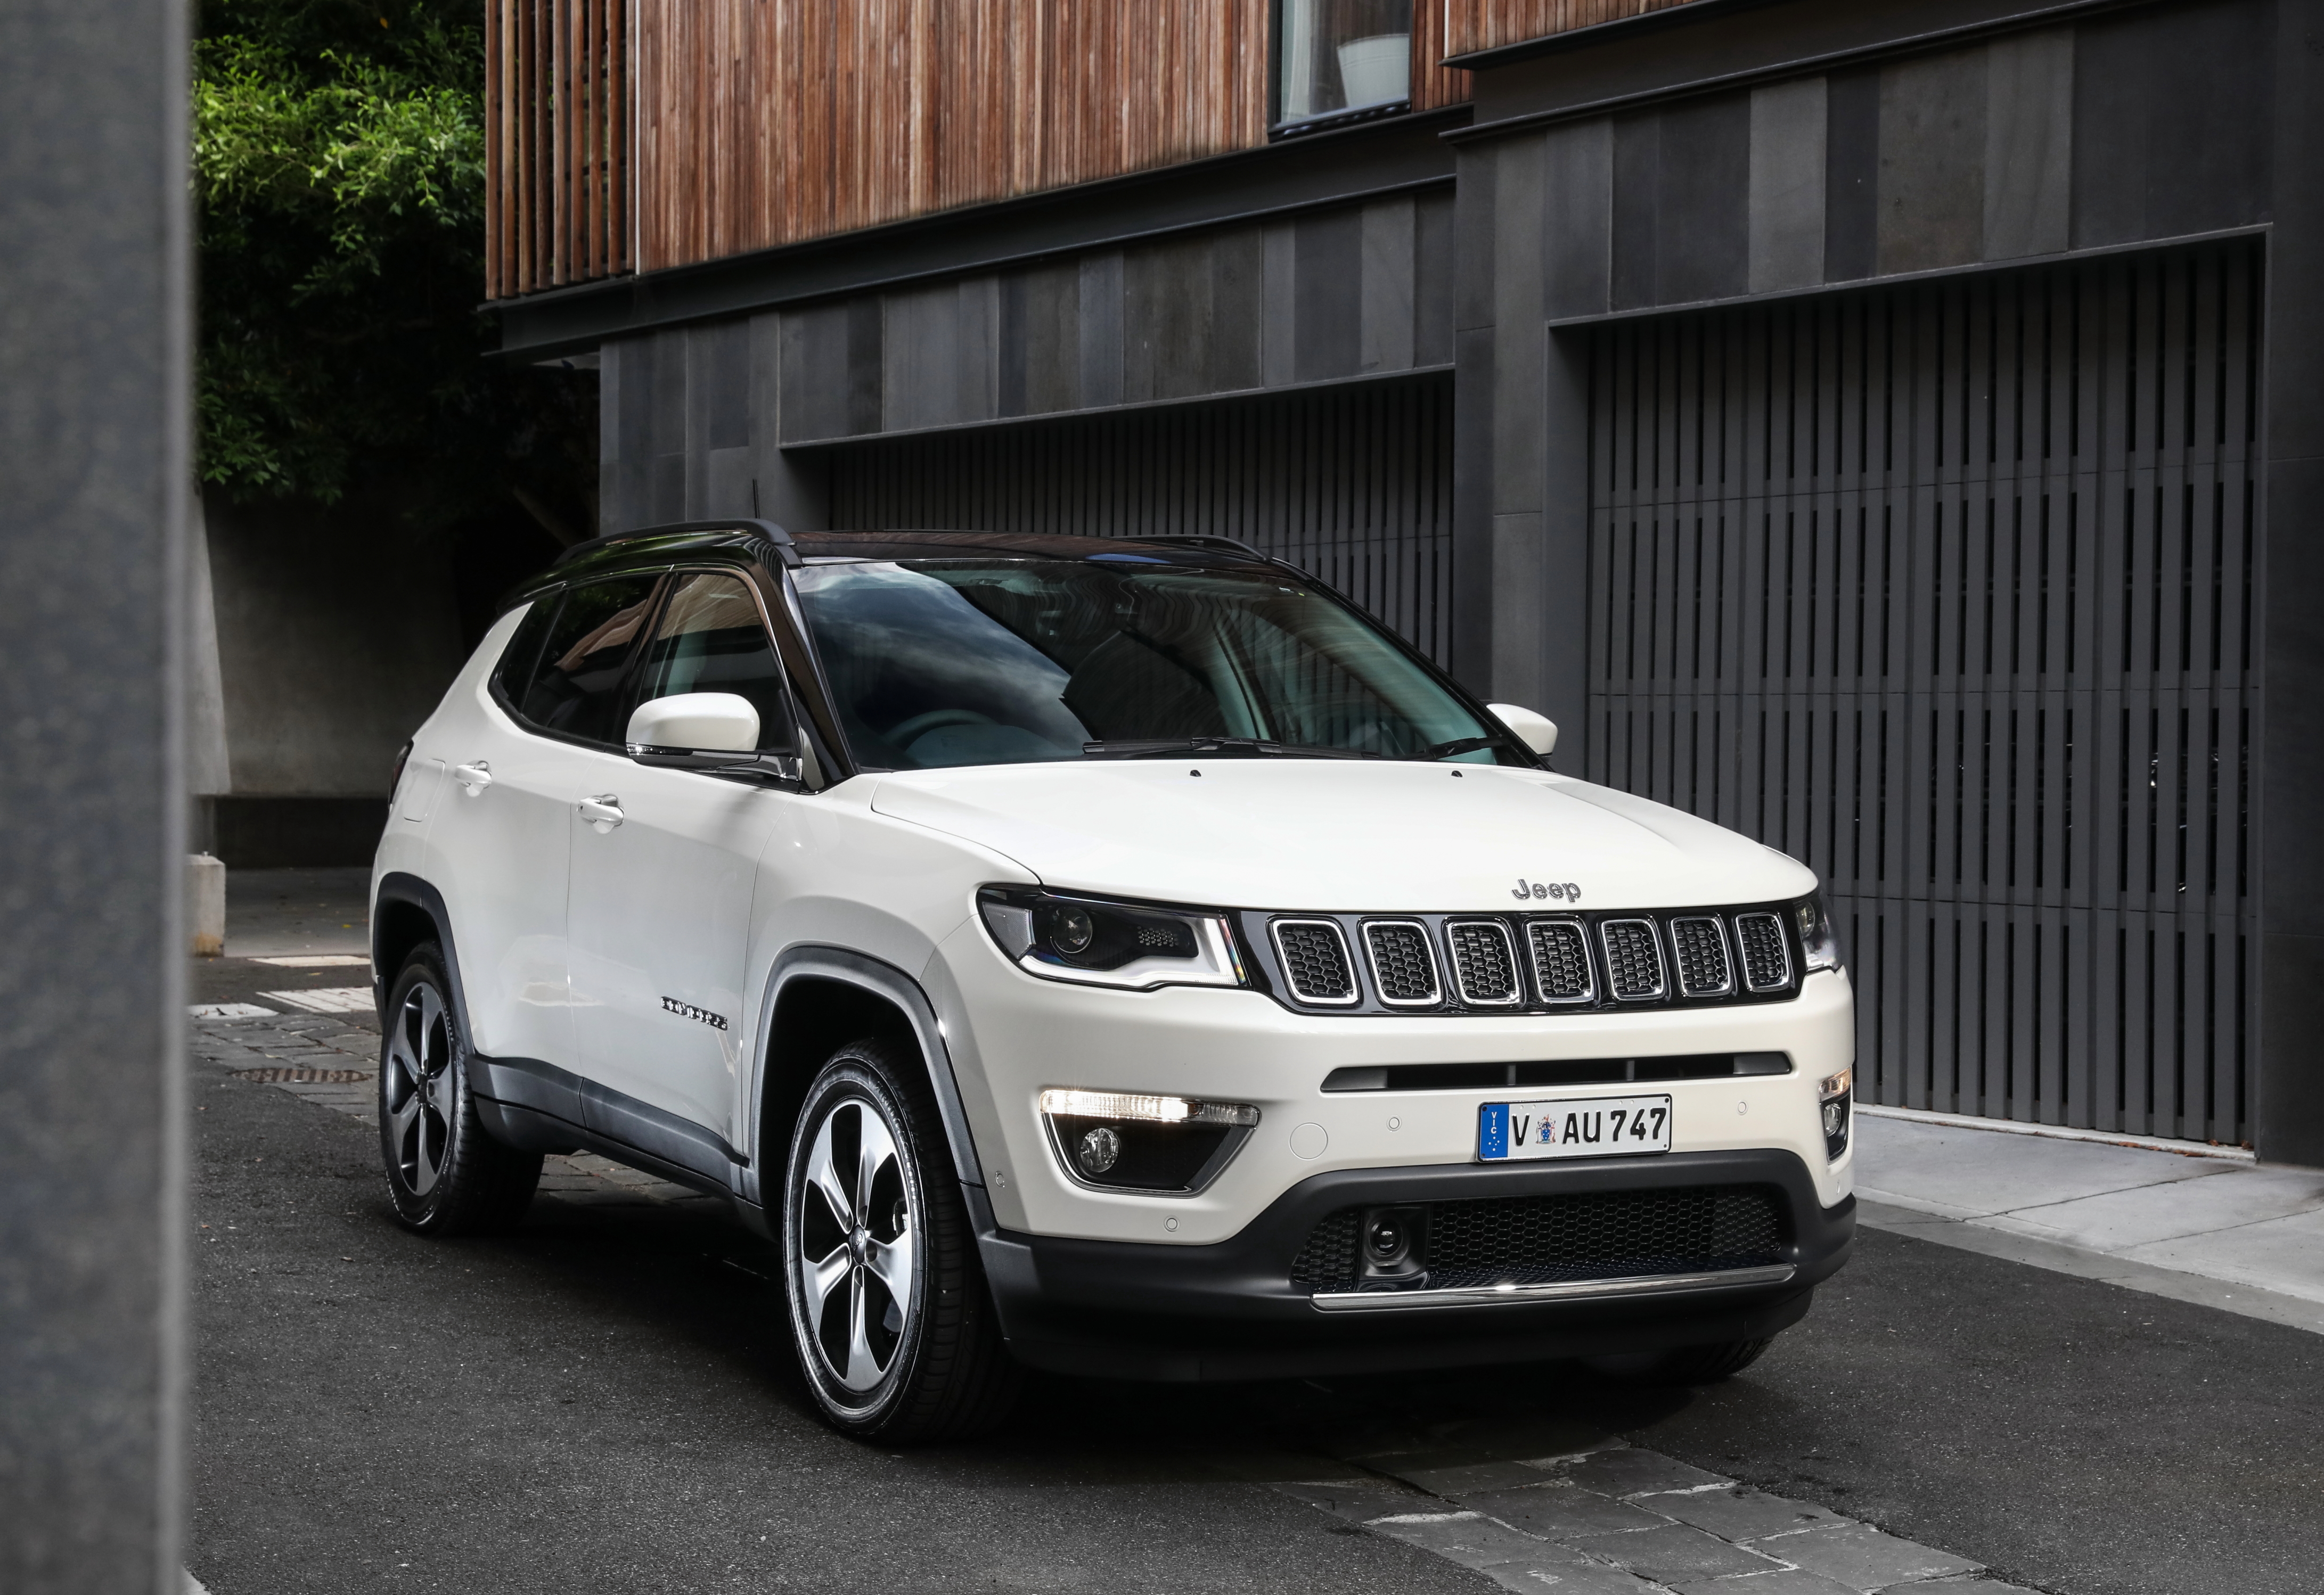 2018 Jeep Compass Pricing And Specs